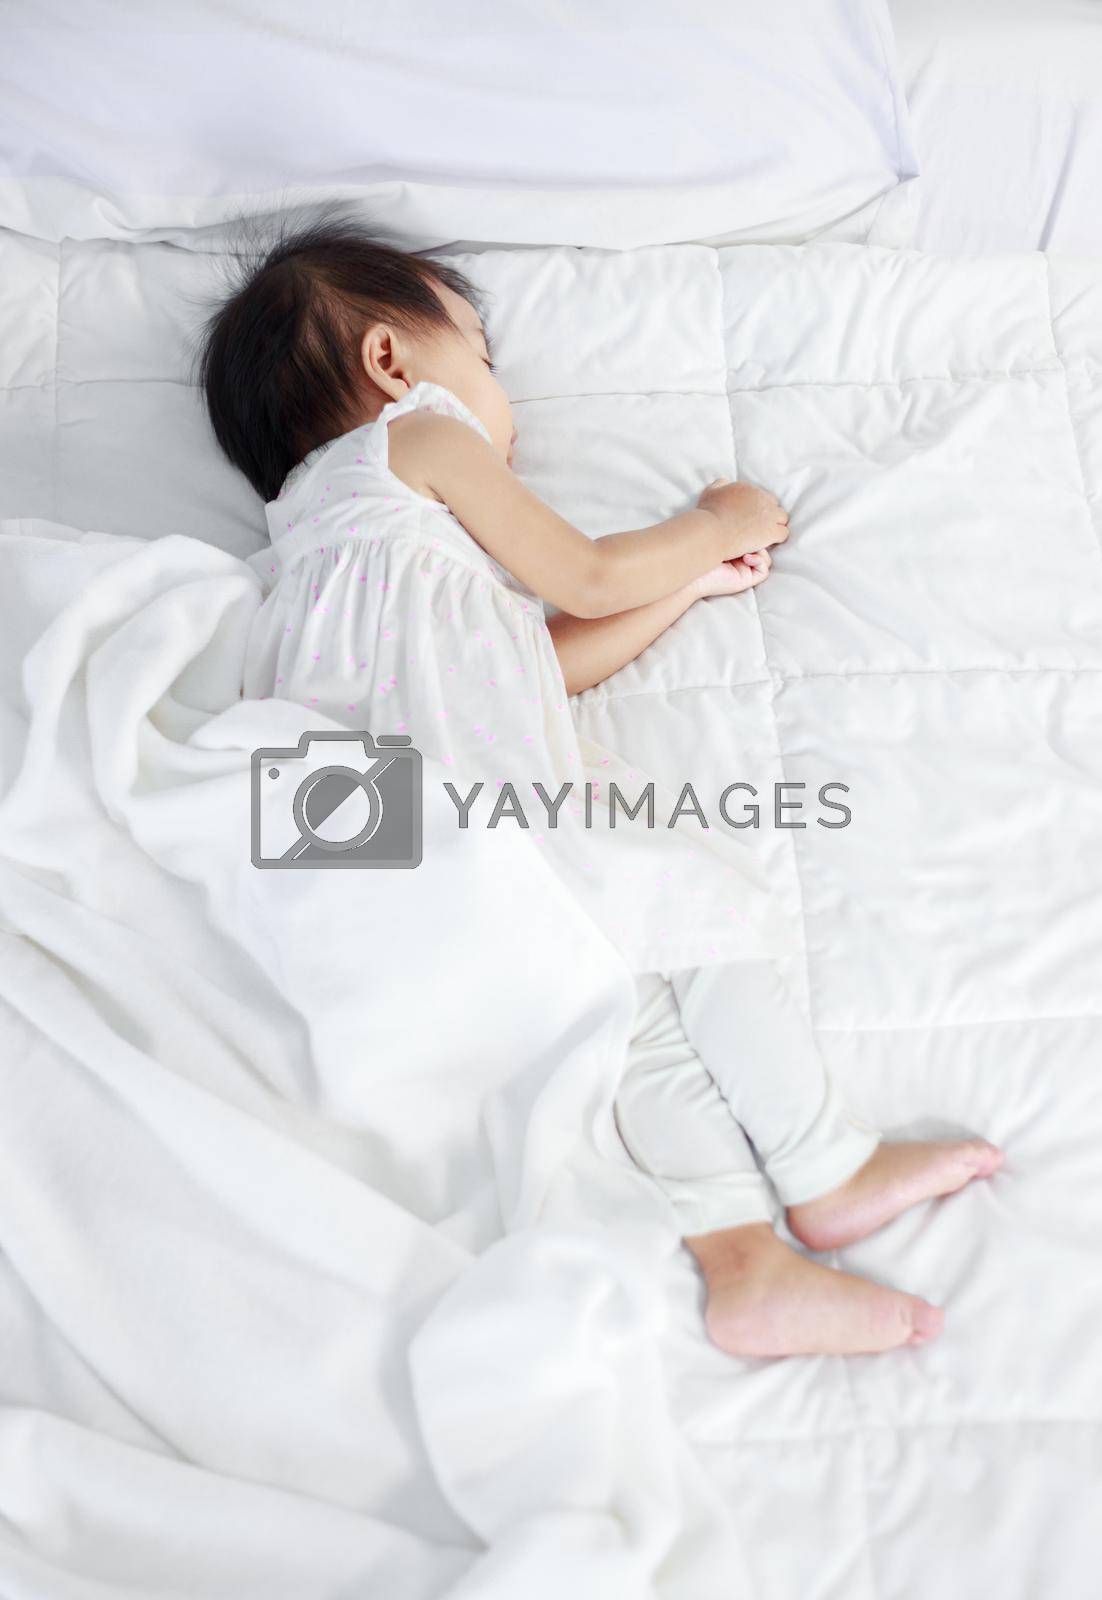 Royalty free image of baby sleeping on bed at home by geargodz